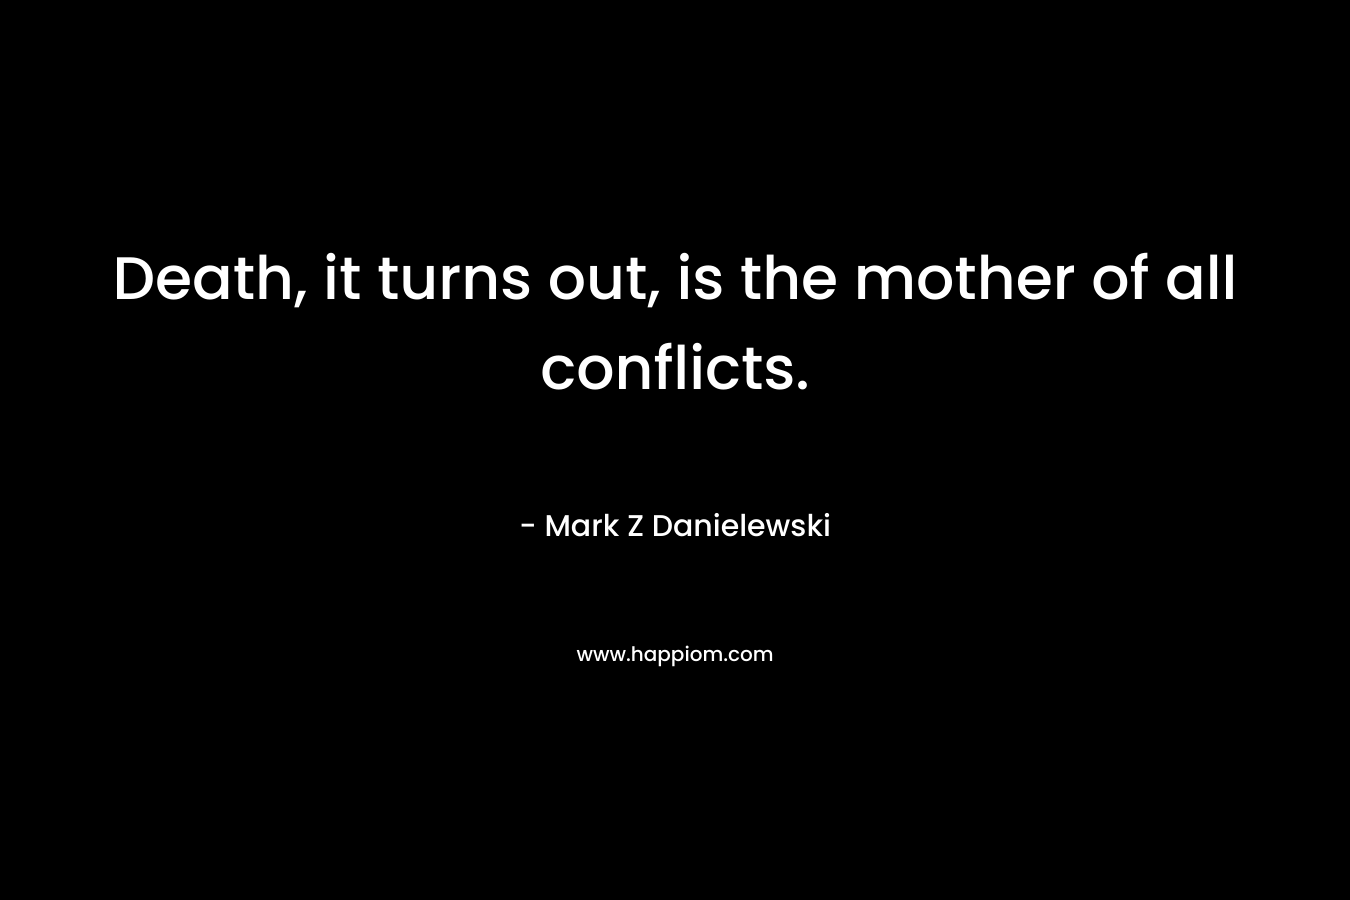 Death, it turns out, is the mother of all conflicts. – Mark Z Danielewski